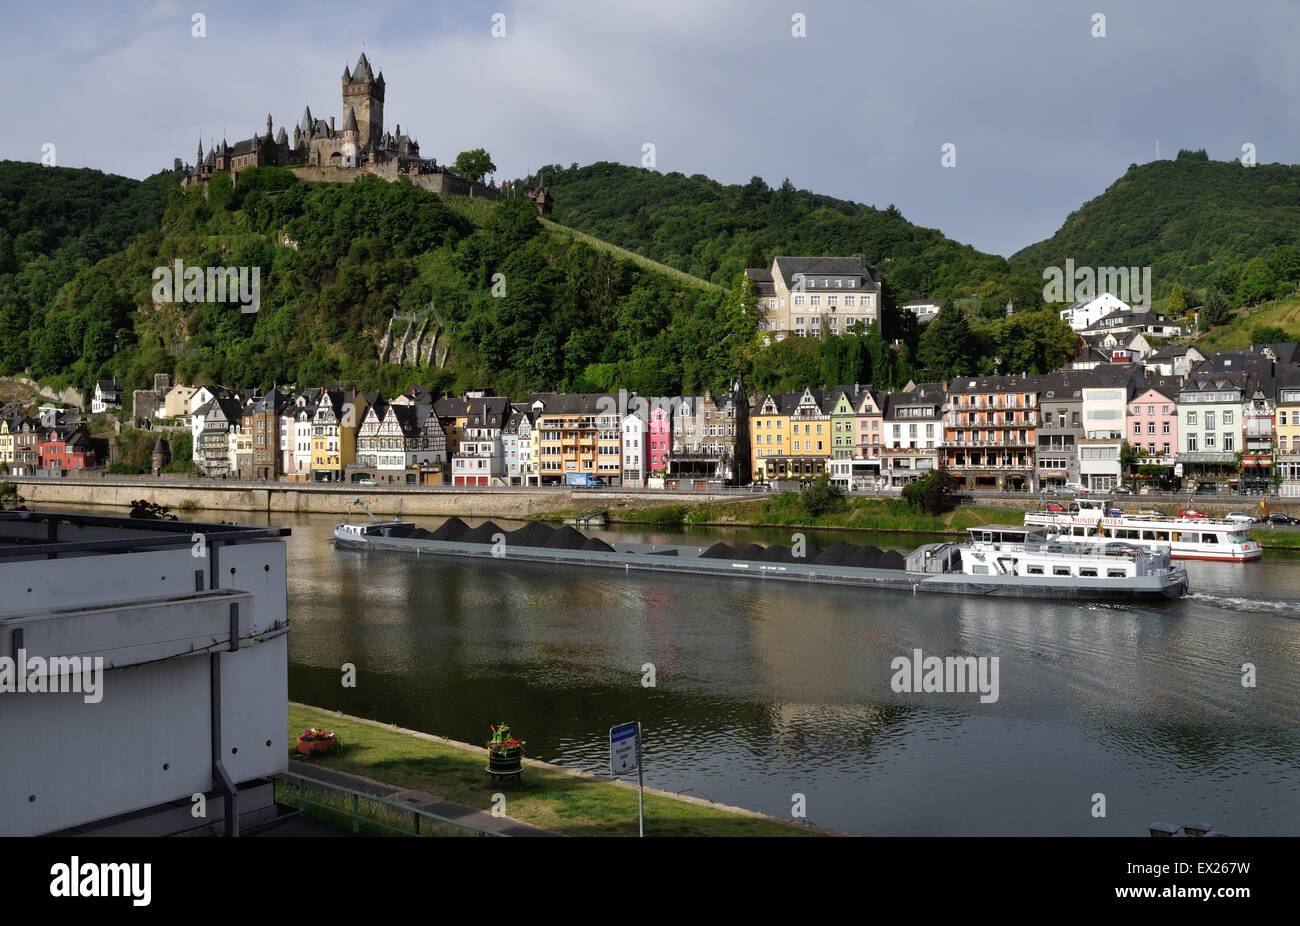 Cargo barge Graciosa, registered in Antwerp, Belgium, travels up the River Moselle at Cochem, Germany, laden with coal. Stock Photo